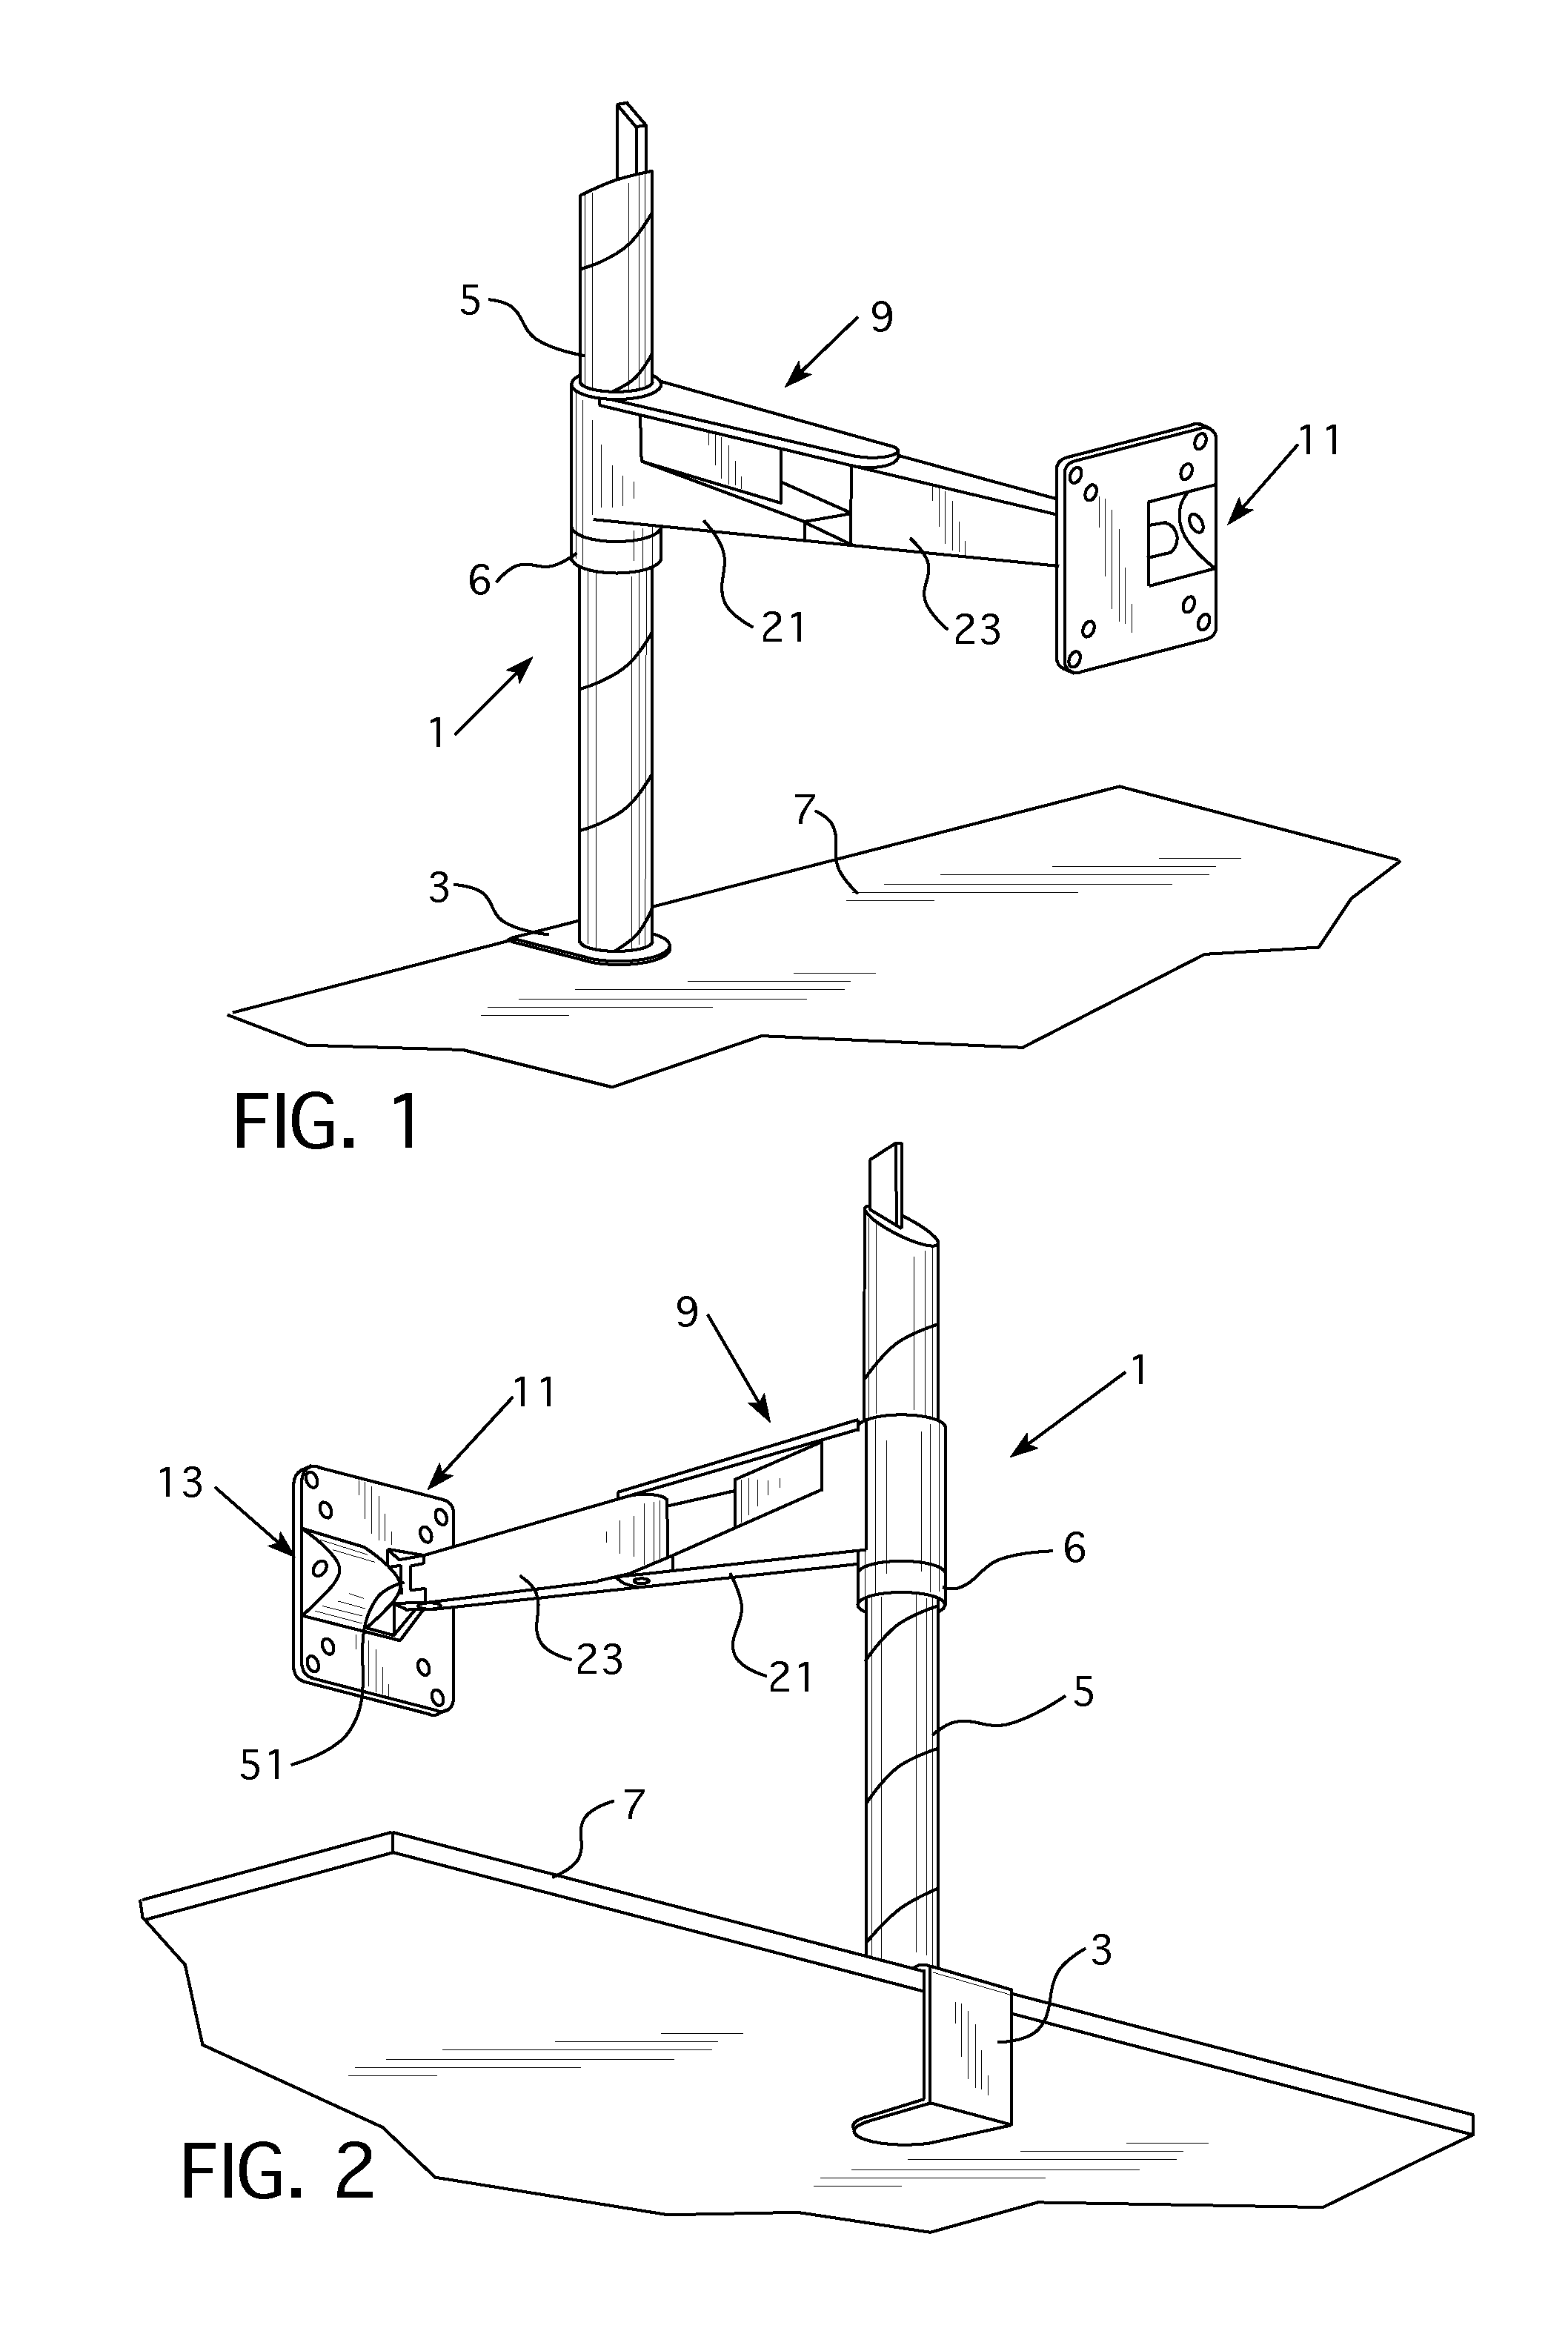 Friction adjustment mechanism for a support apparatus